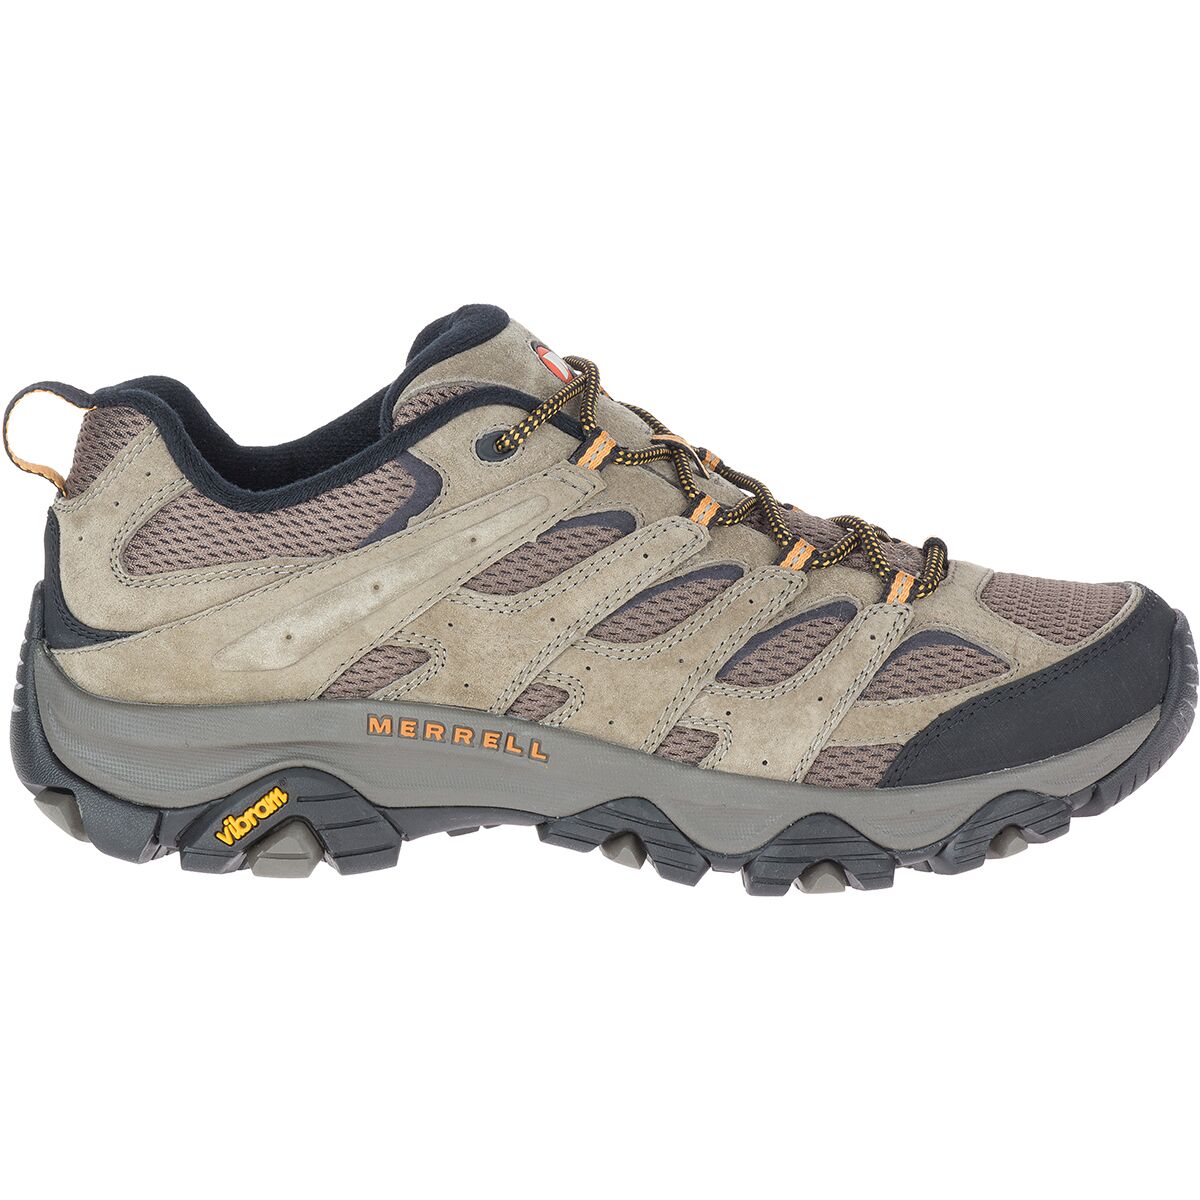 Merrell hiking boots & shoes: What do think?